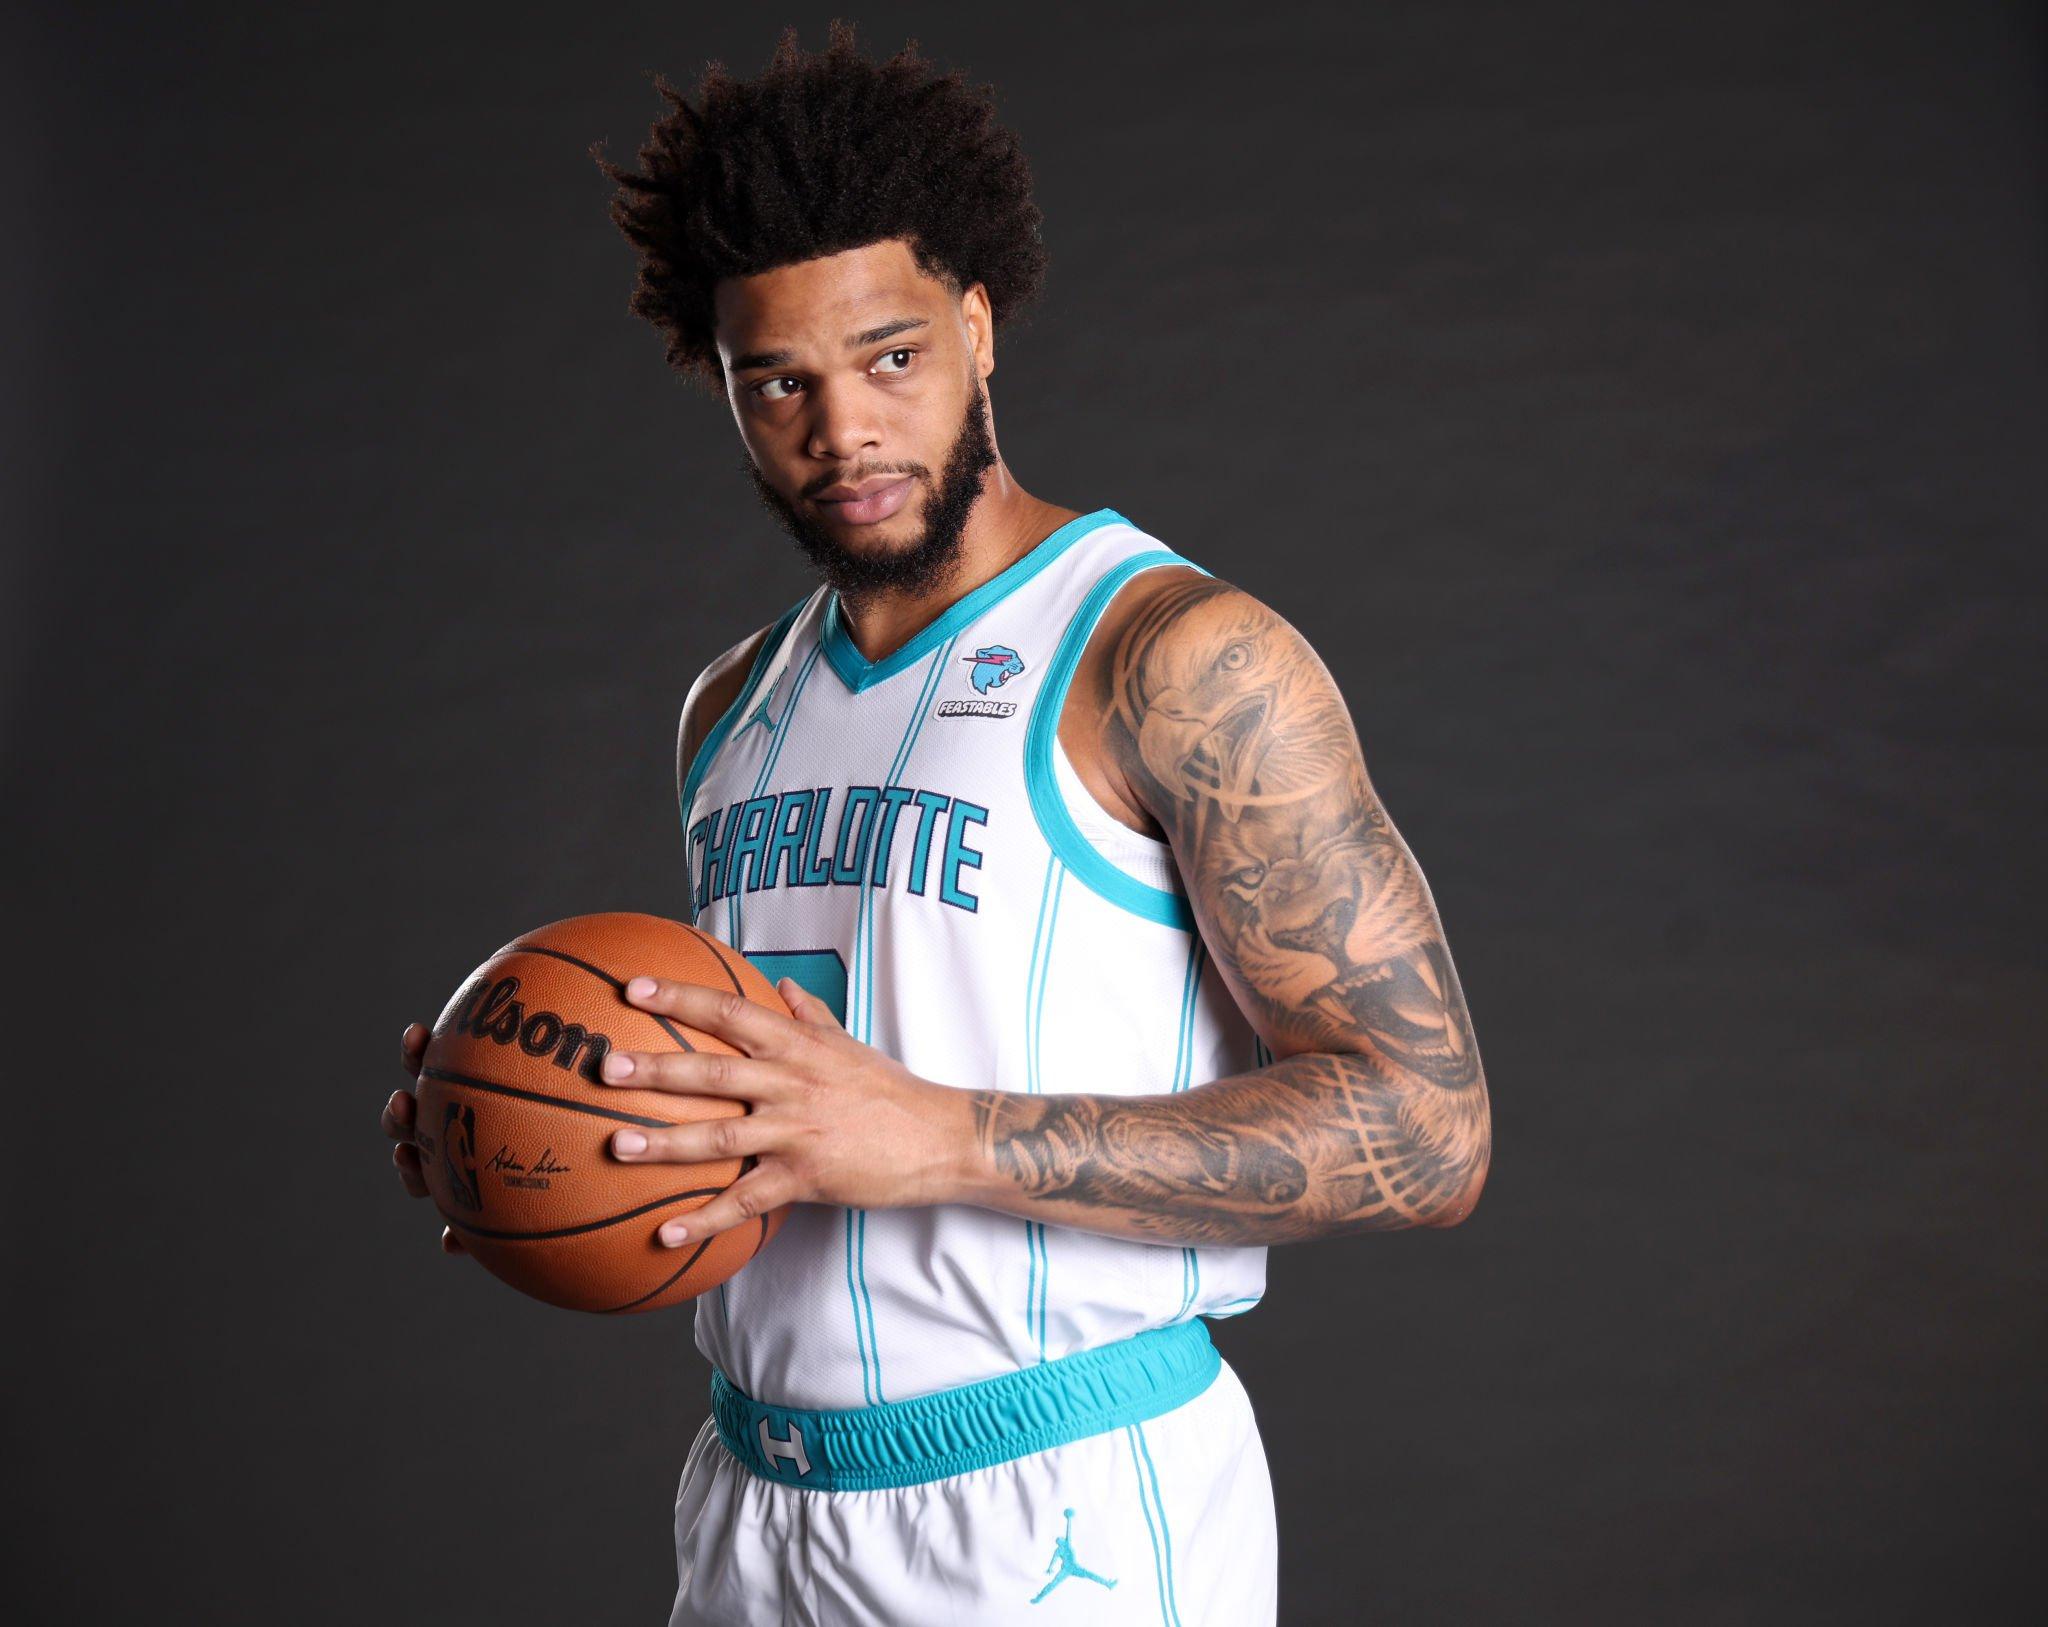 CHARLOTTE, NORTH CAROLINA - OCTOBER 02: Miles Bridges #0 of the Charlotte Hornets poses for a portrait during Charlotte Hornets Media Day at Spectrum Center on October 02, 2023 in Charlotte, North Carolina. NOTE TO USER: User expressly acknowledges and agrees that, by downloading and or using this photograph, User is consenting to the terms and conditions of the Getty Images License Agreement. (Photo by Jared C. Tilton/Getty Images)